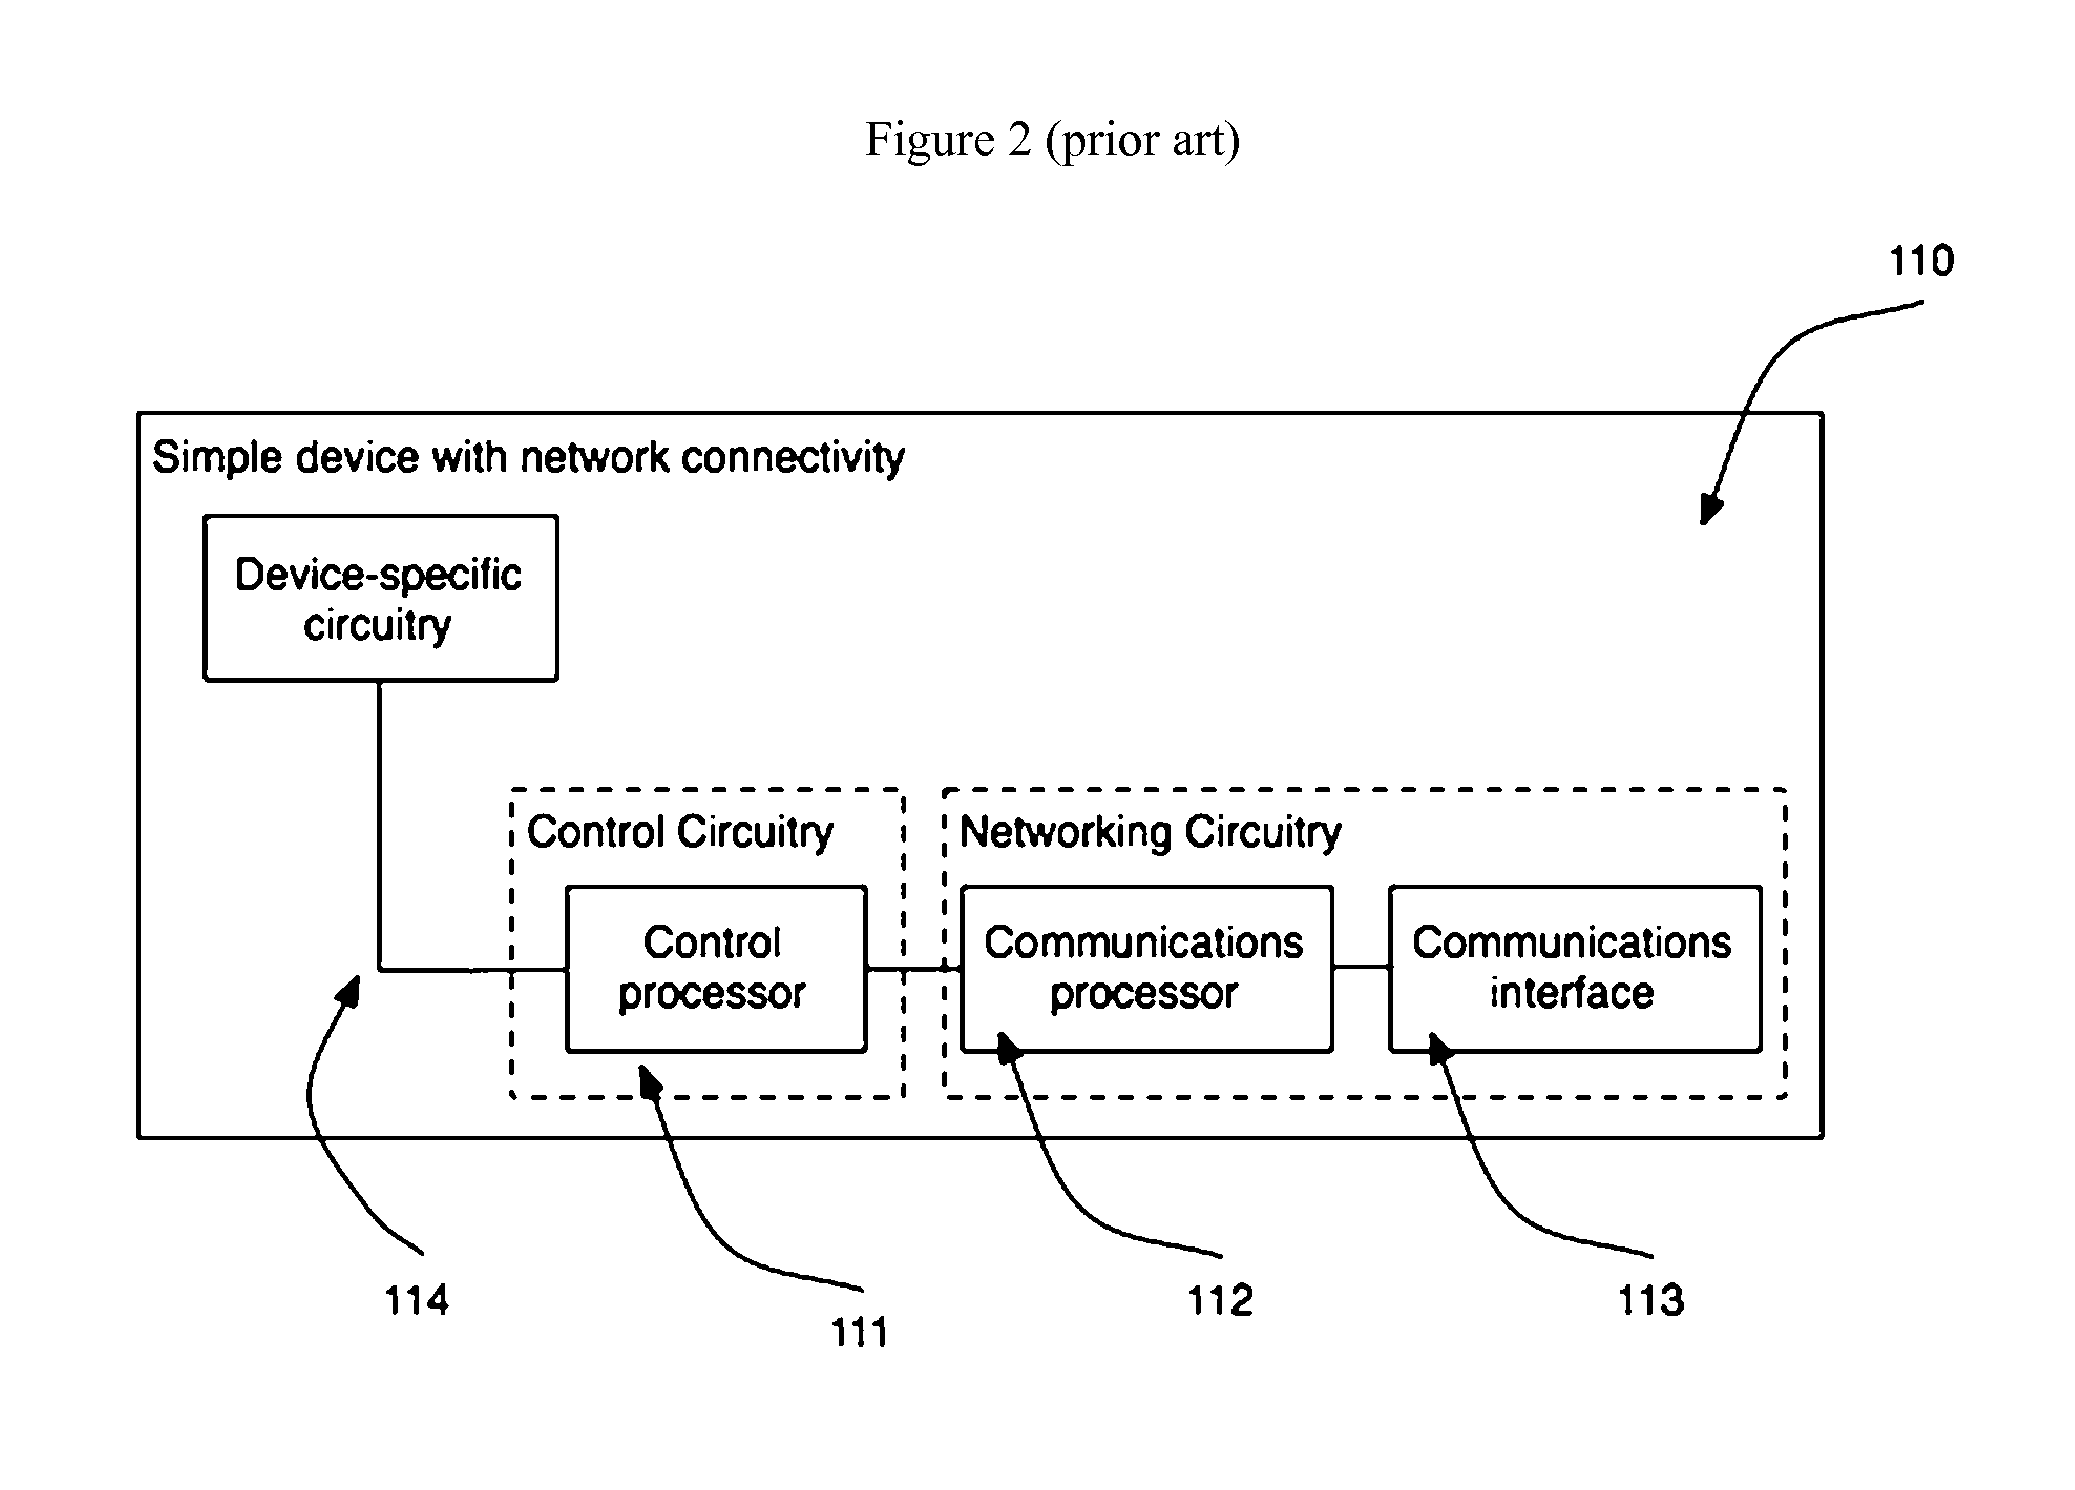 Optically configured modularized control system to enable wireless network control and sensing of other devices